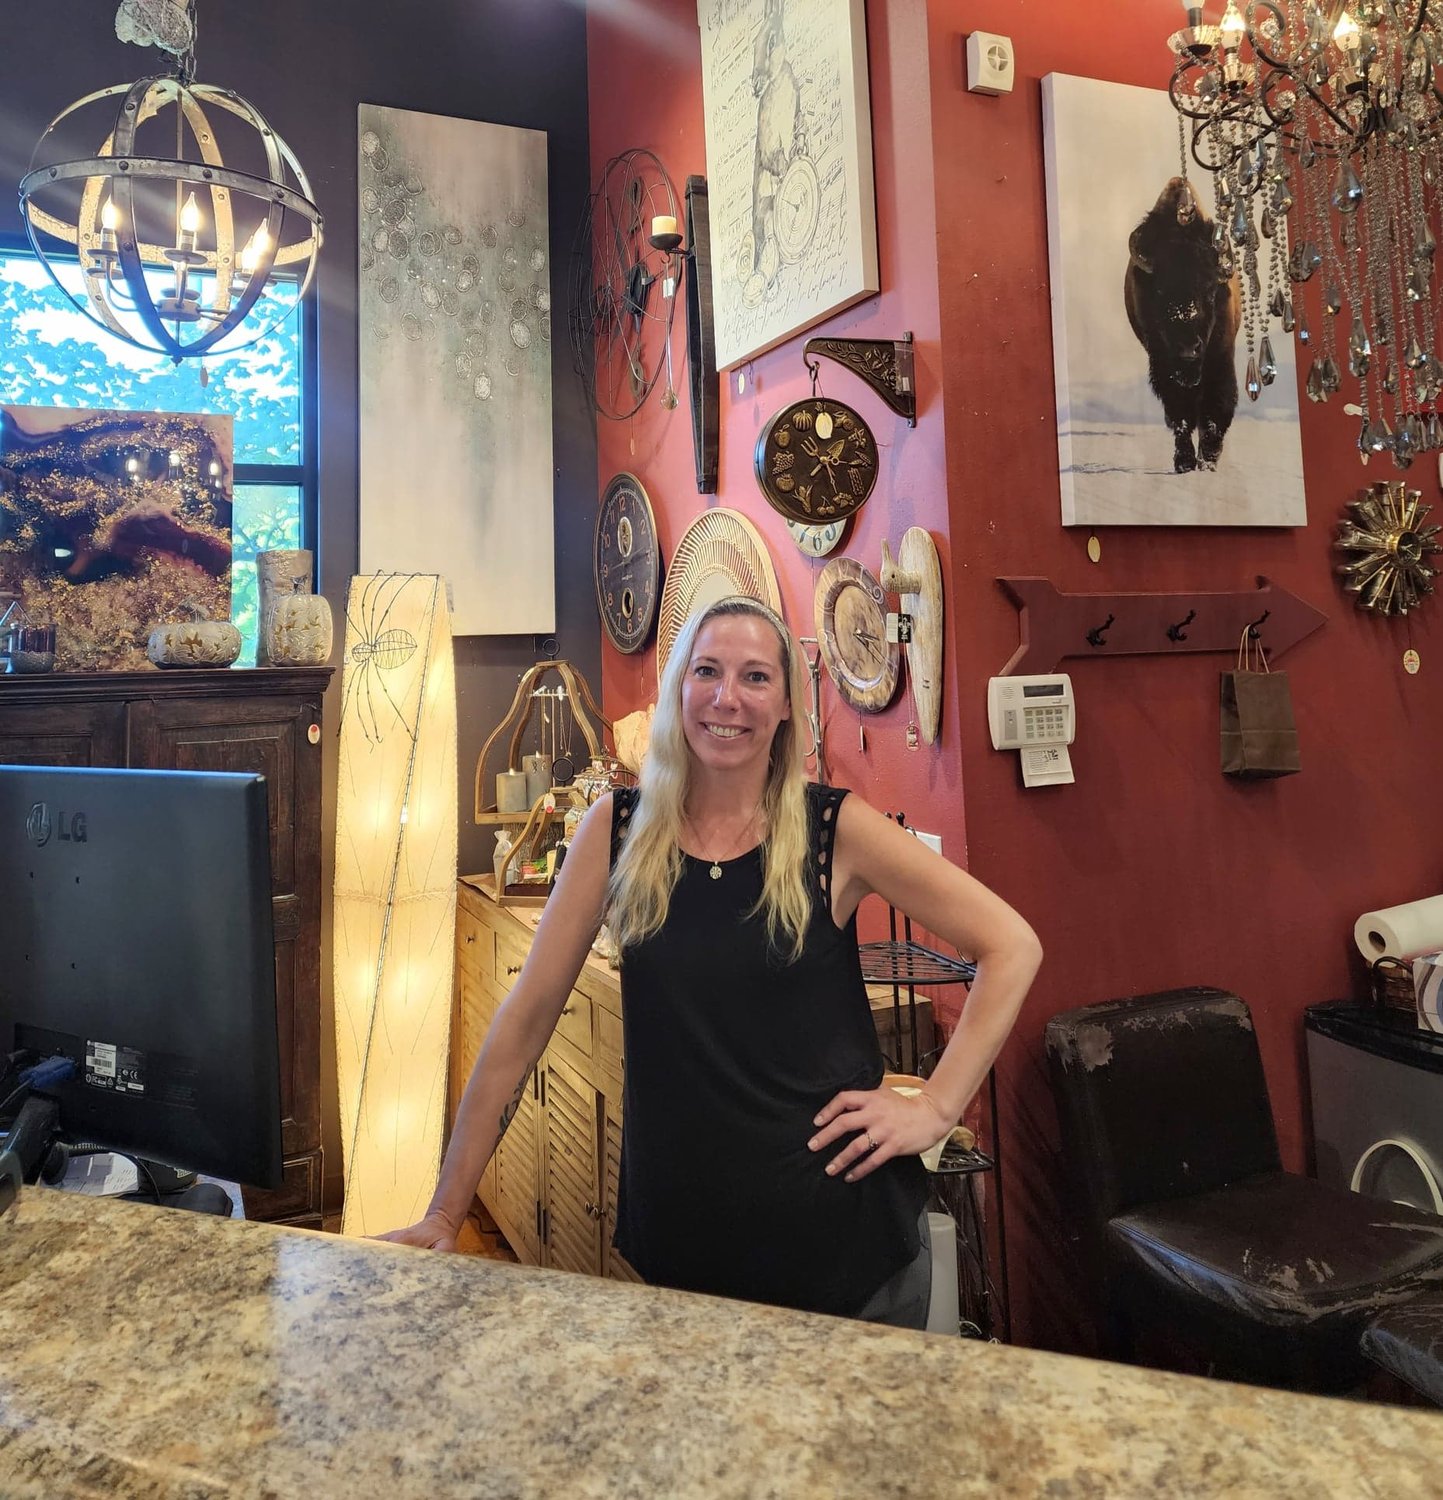 Rare Earth Decor manager Kolby Collins stands behind the counter at the store in Ridgefield.